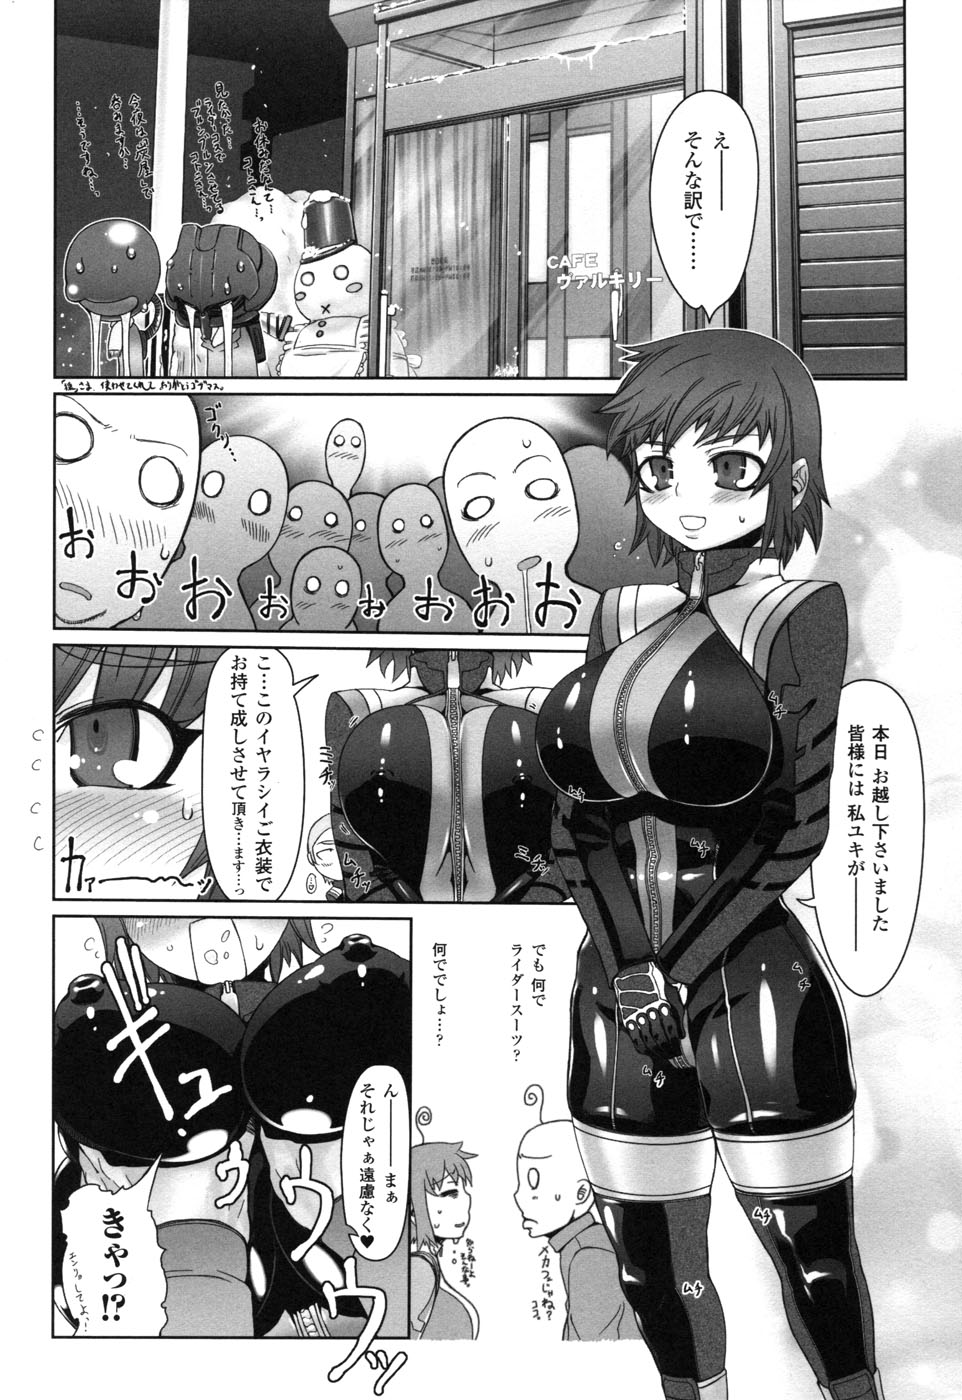 Rider Suit Heroine Anthology Comics 2 page 30 full